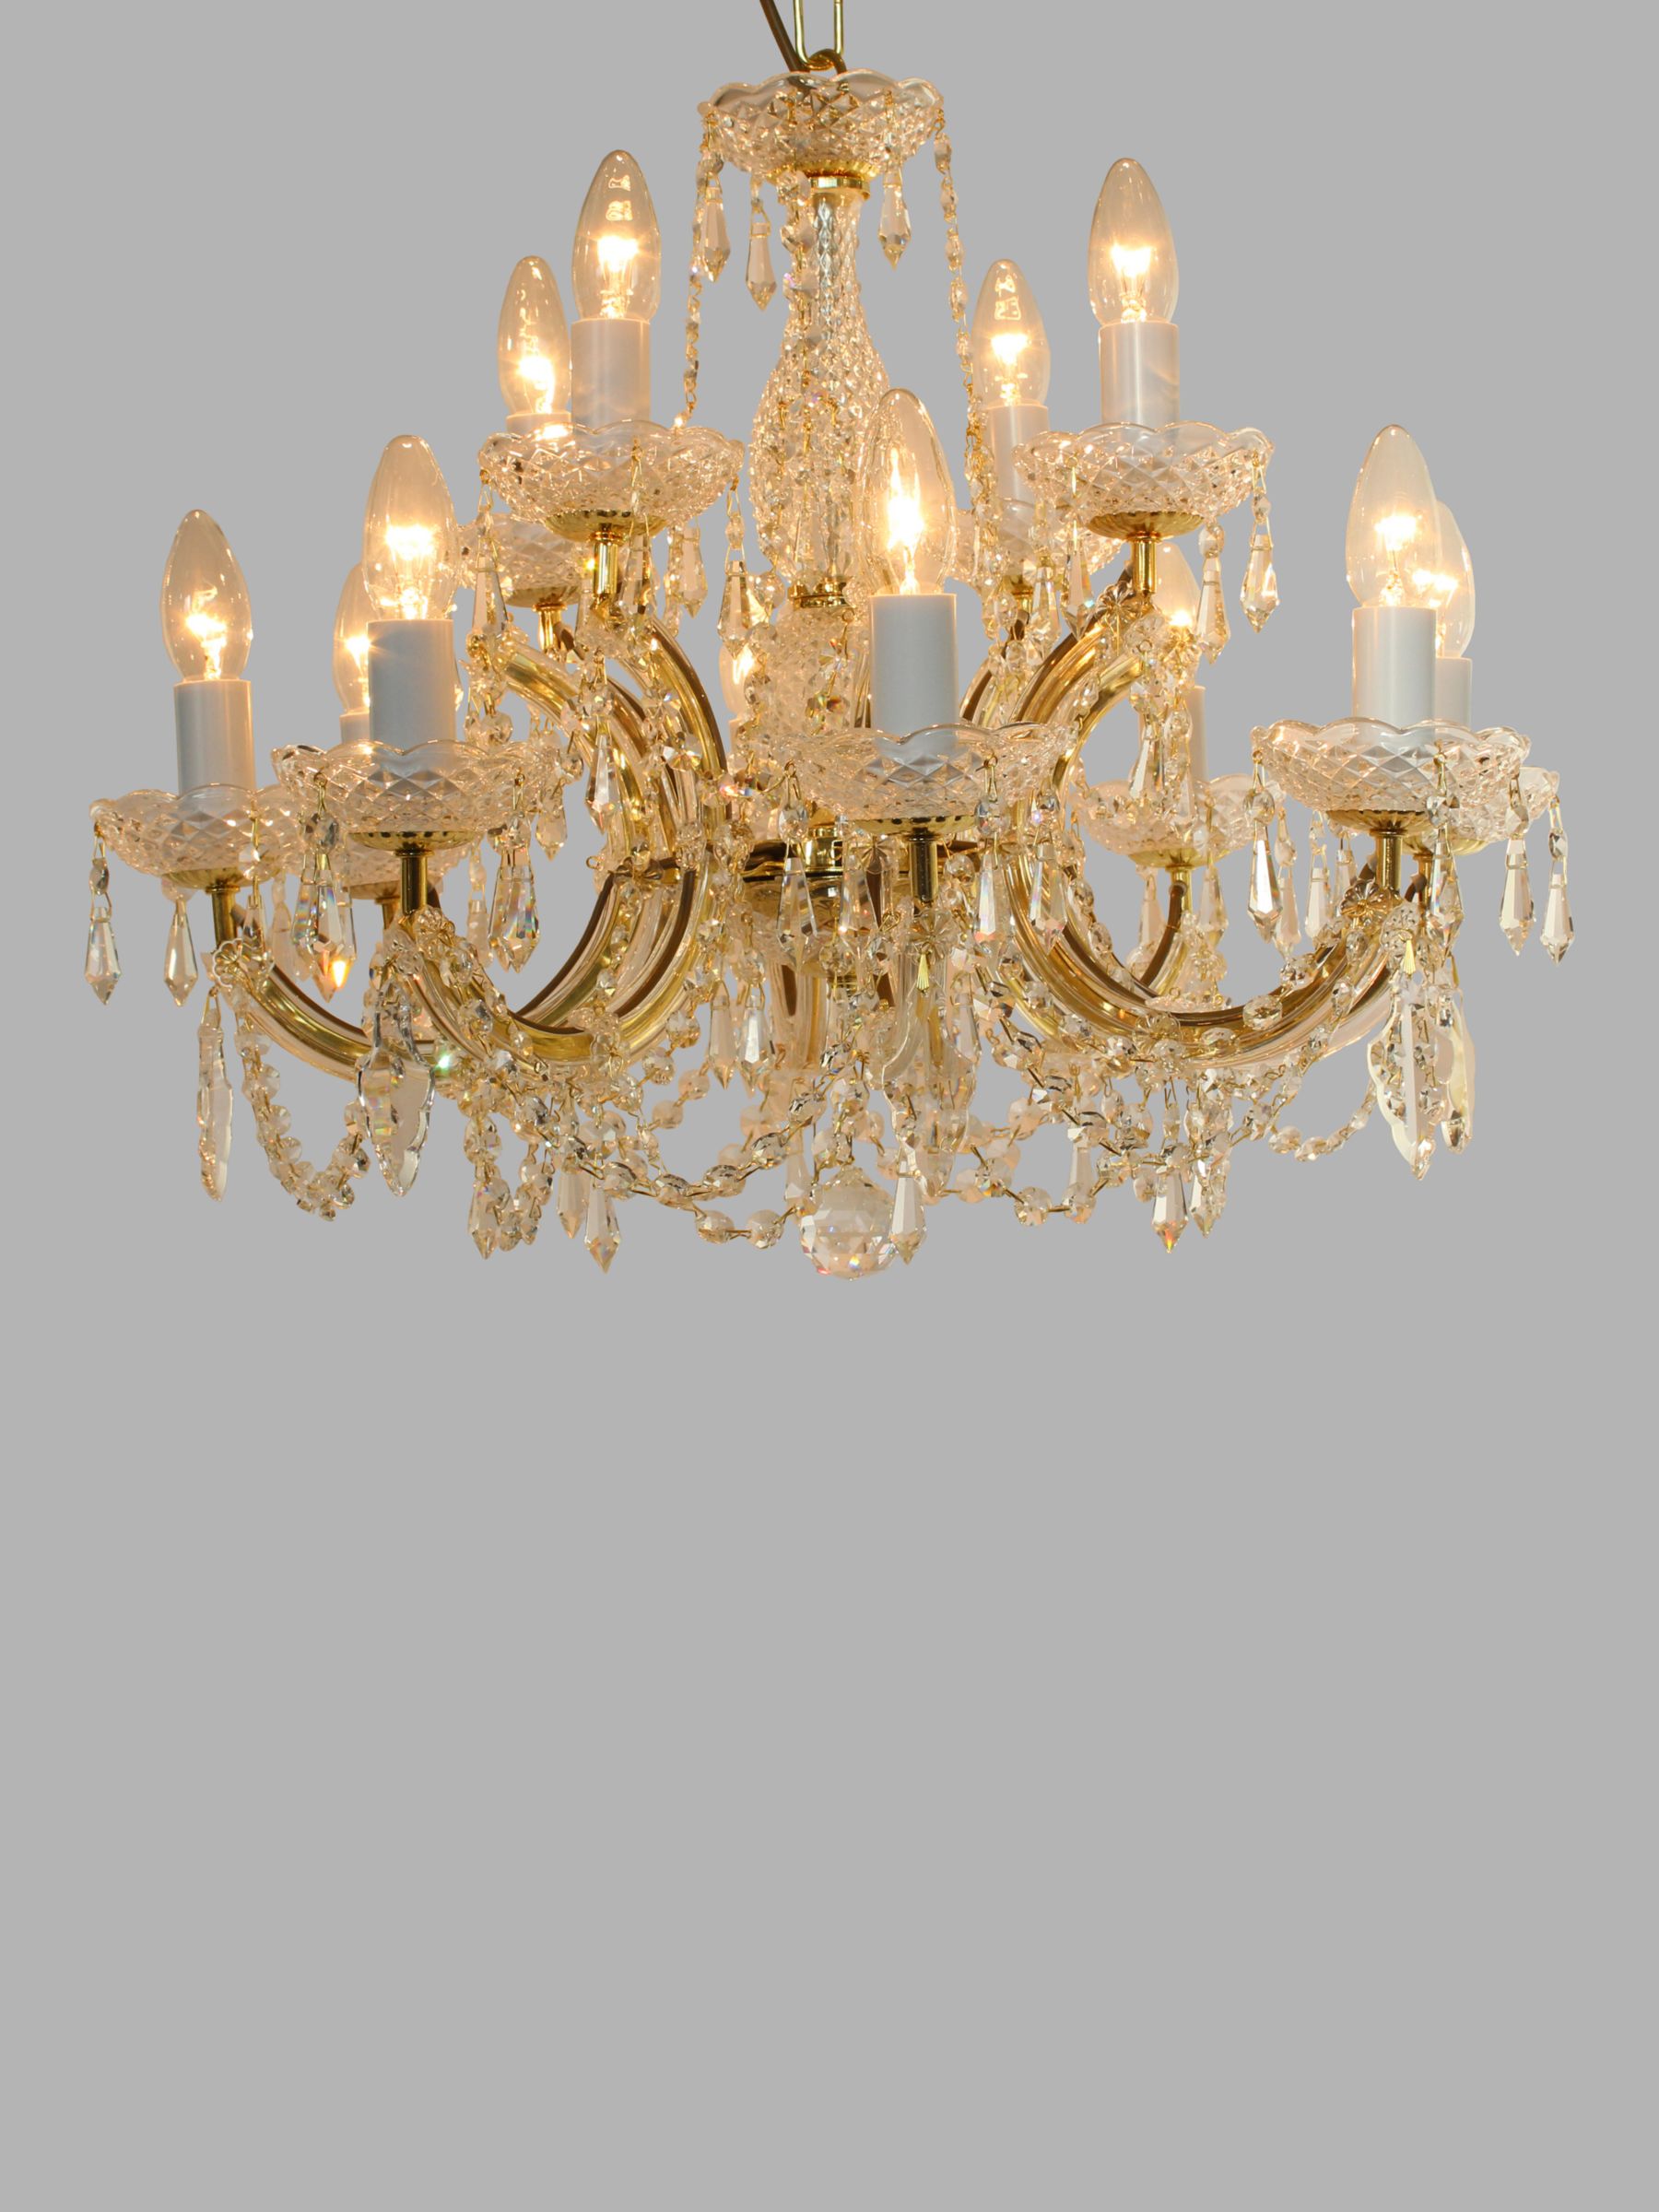 Photo of Impex marie theresa double tiered crystal chandelier ceiling light 8 arms